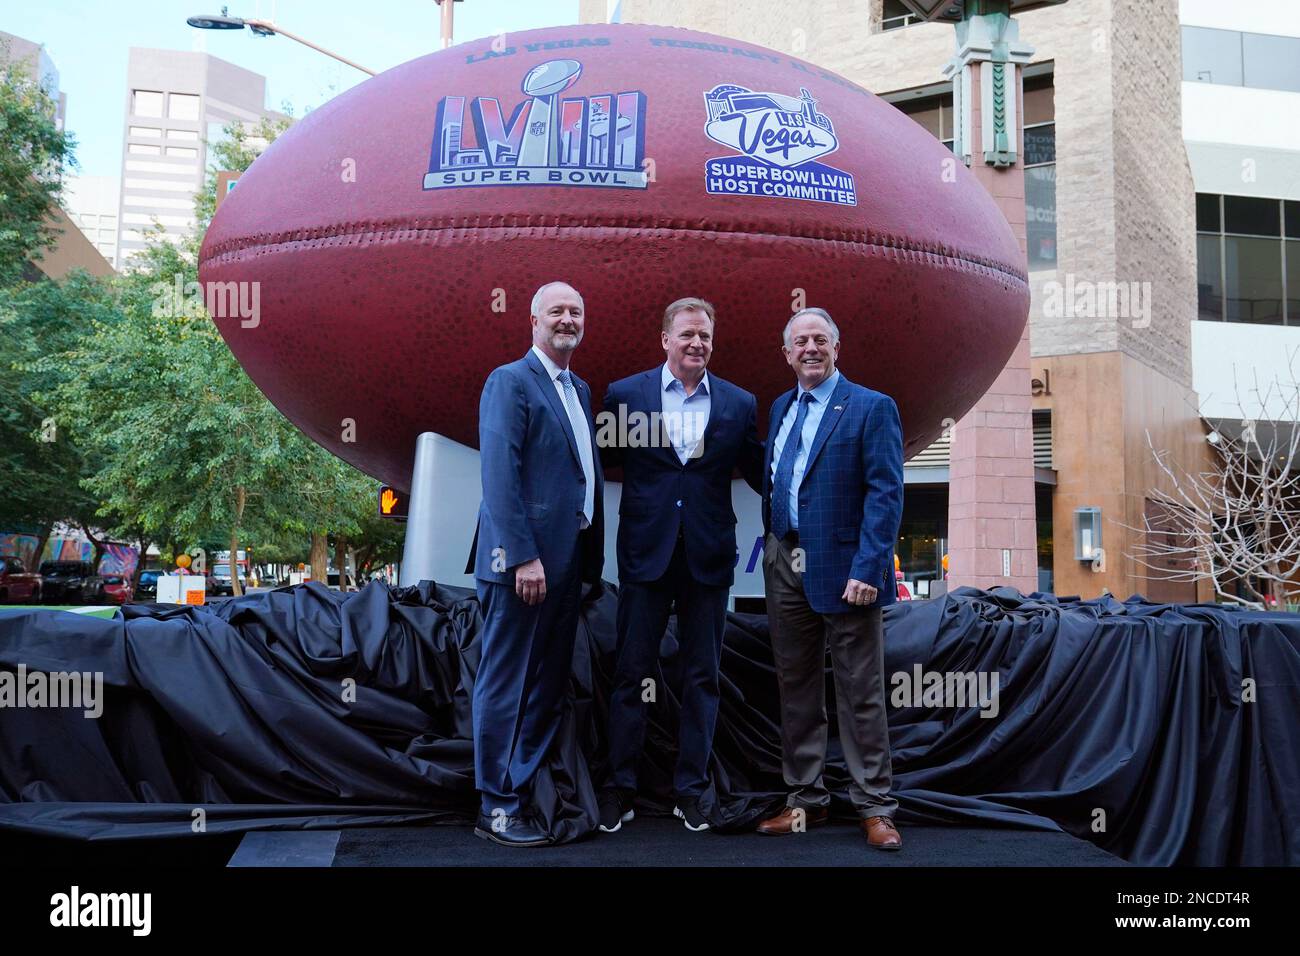 NFL and Las Vegas Super Bowl LVIII Host Committee Announcements